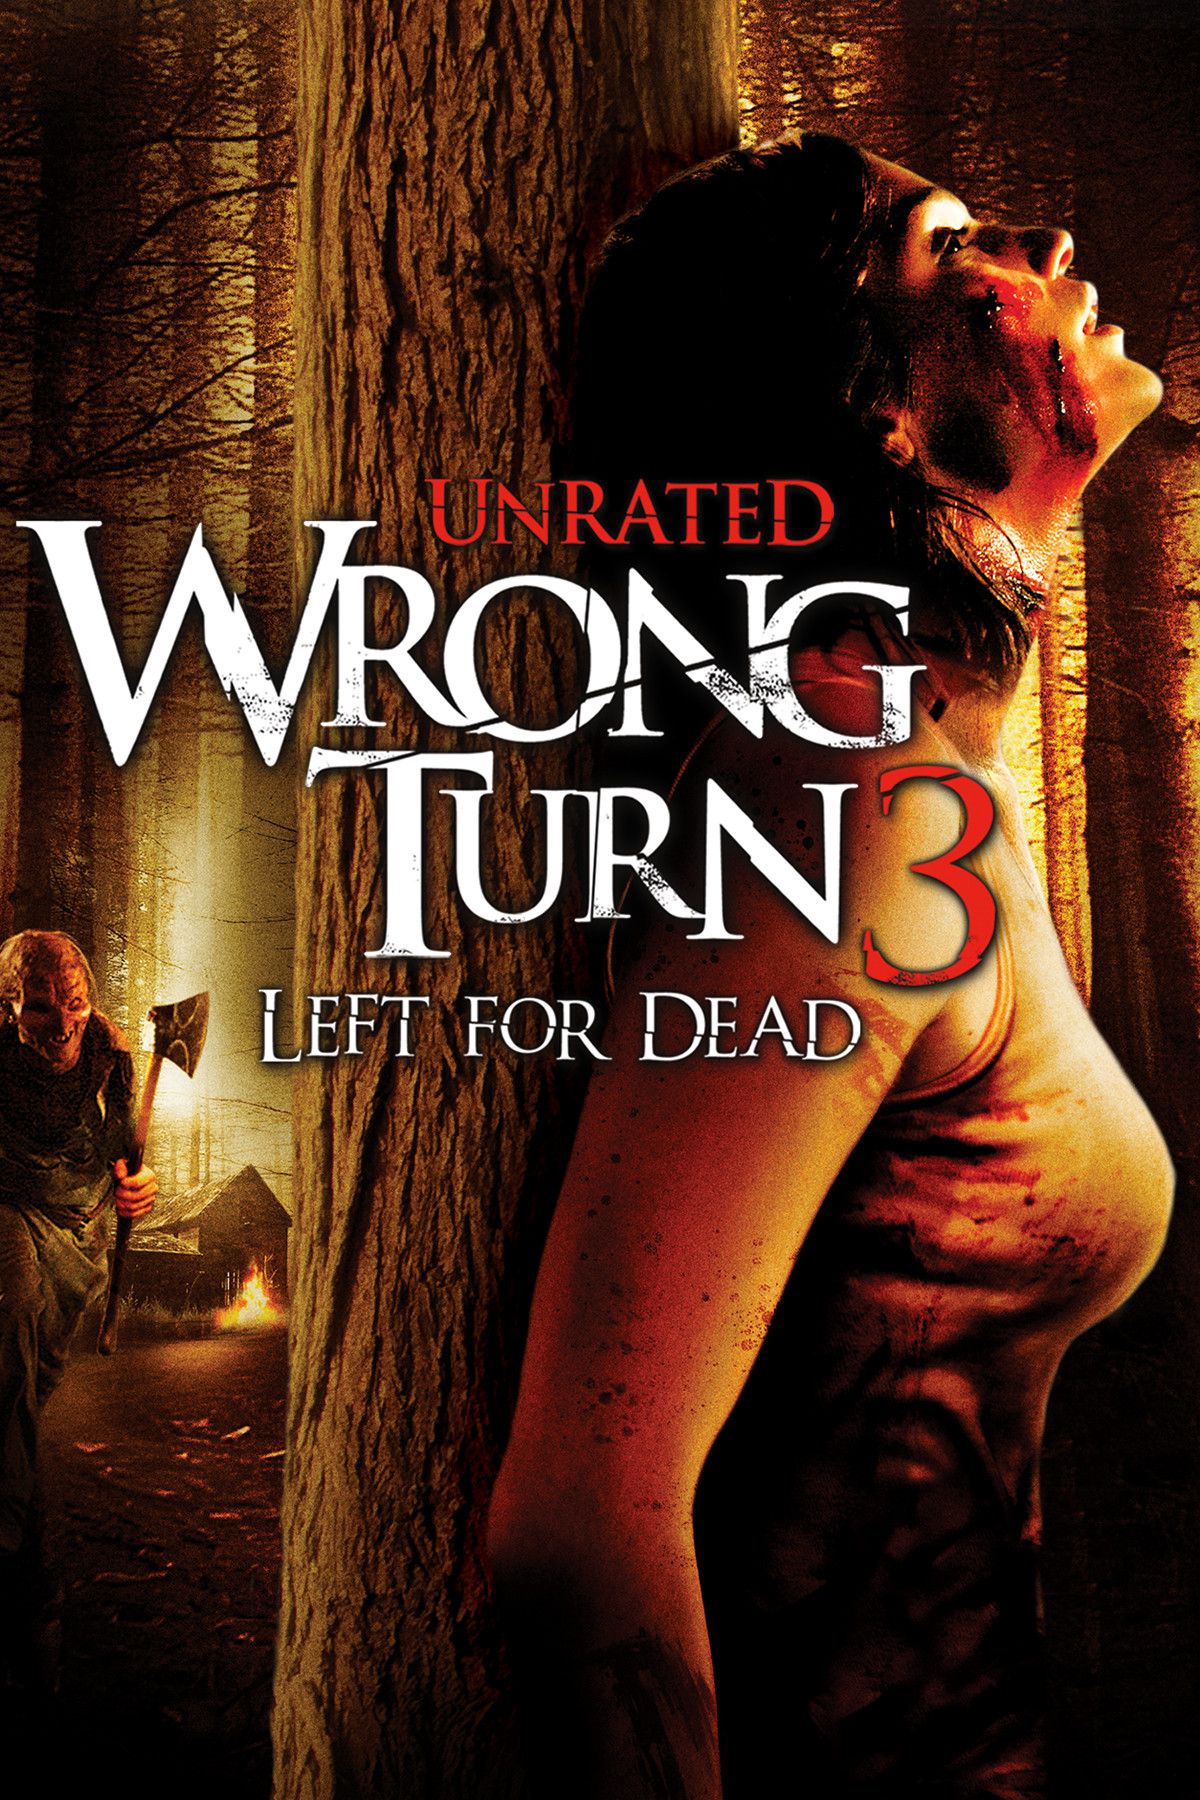 Wrong turn 3 full movie download in hindi dubbed 480p